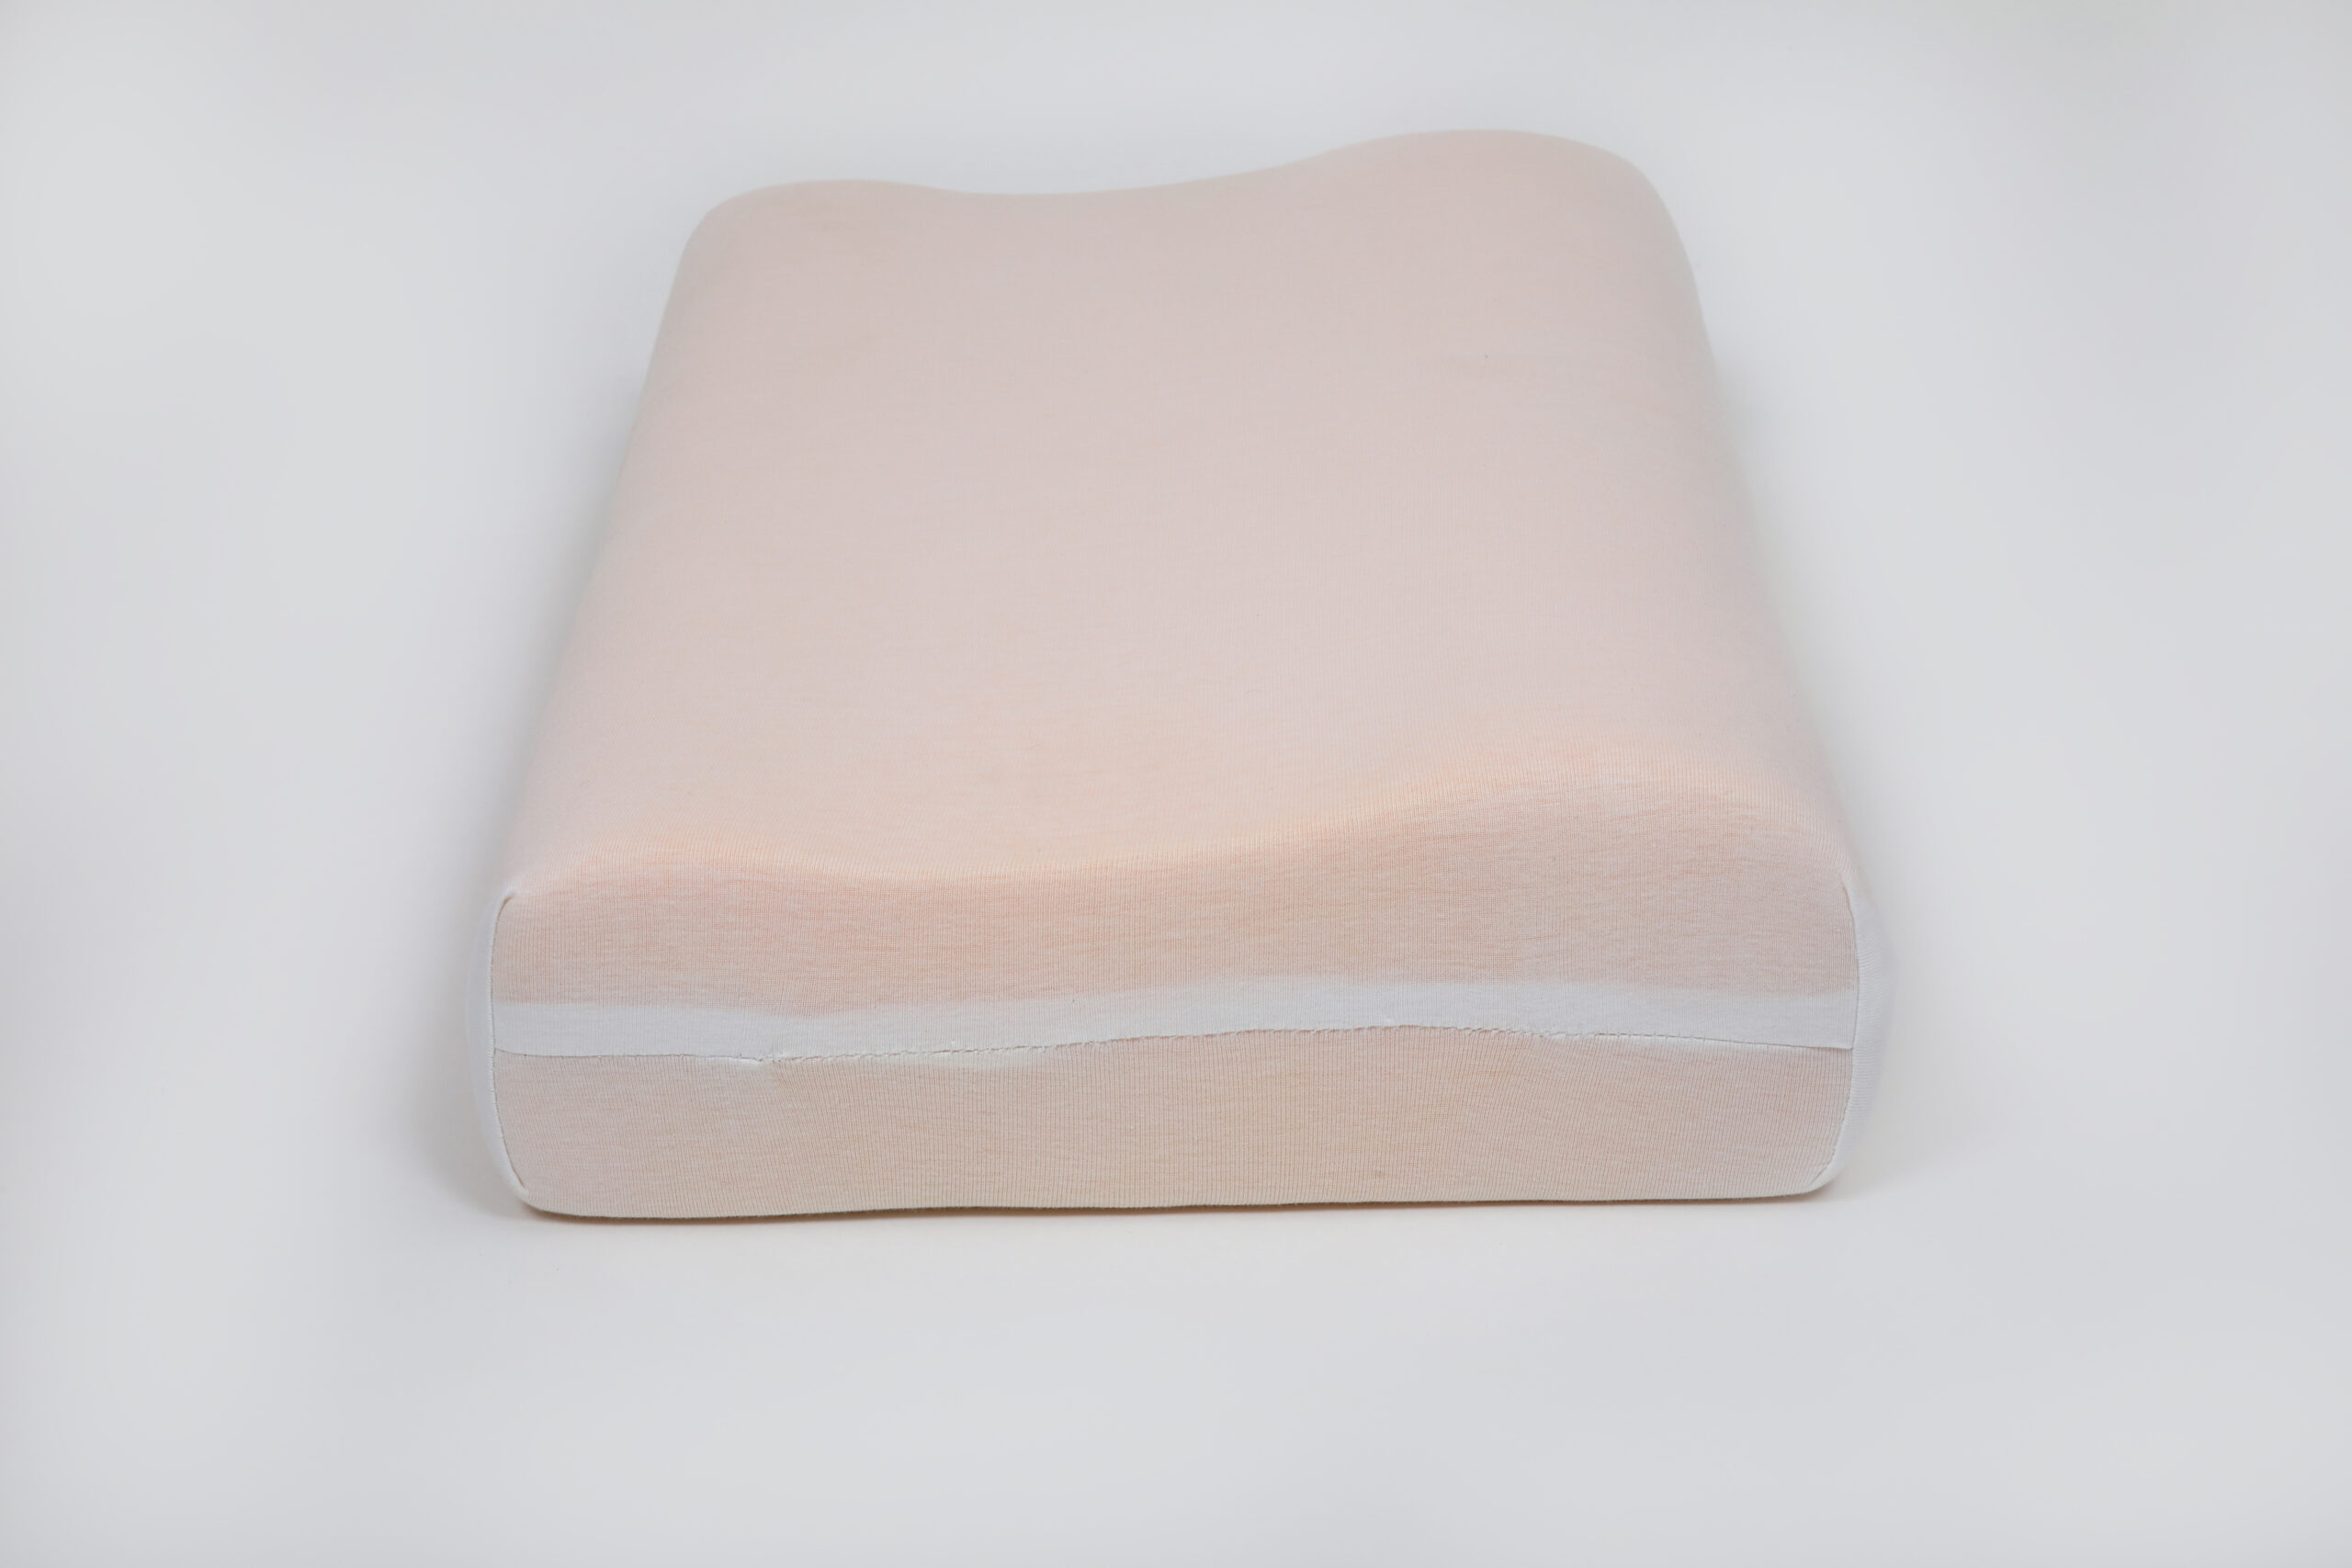 Ergonomic memory foam pillow by NAM House of sleep (picture 4)